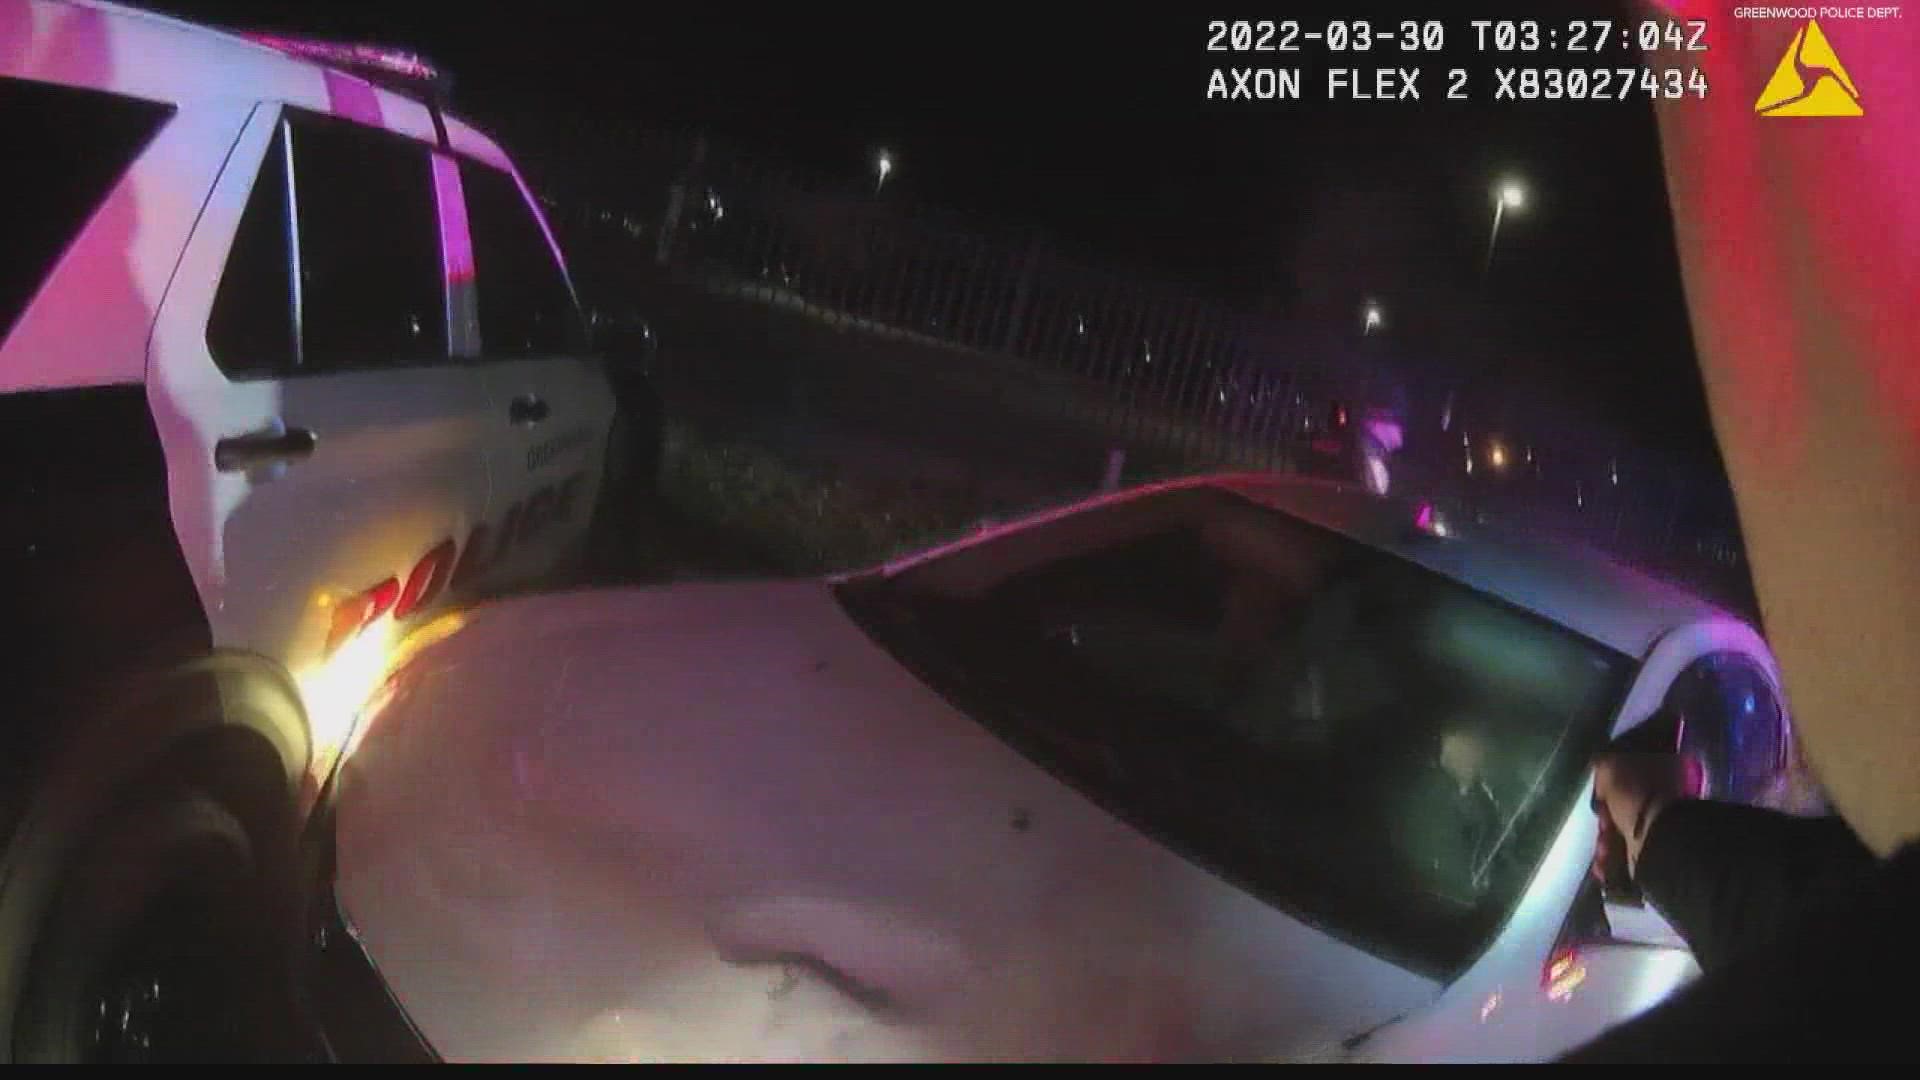 The critical incident video includes surveillance video and bodycam video from officers.